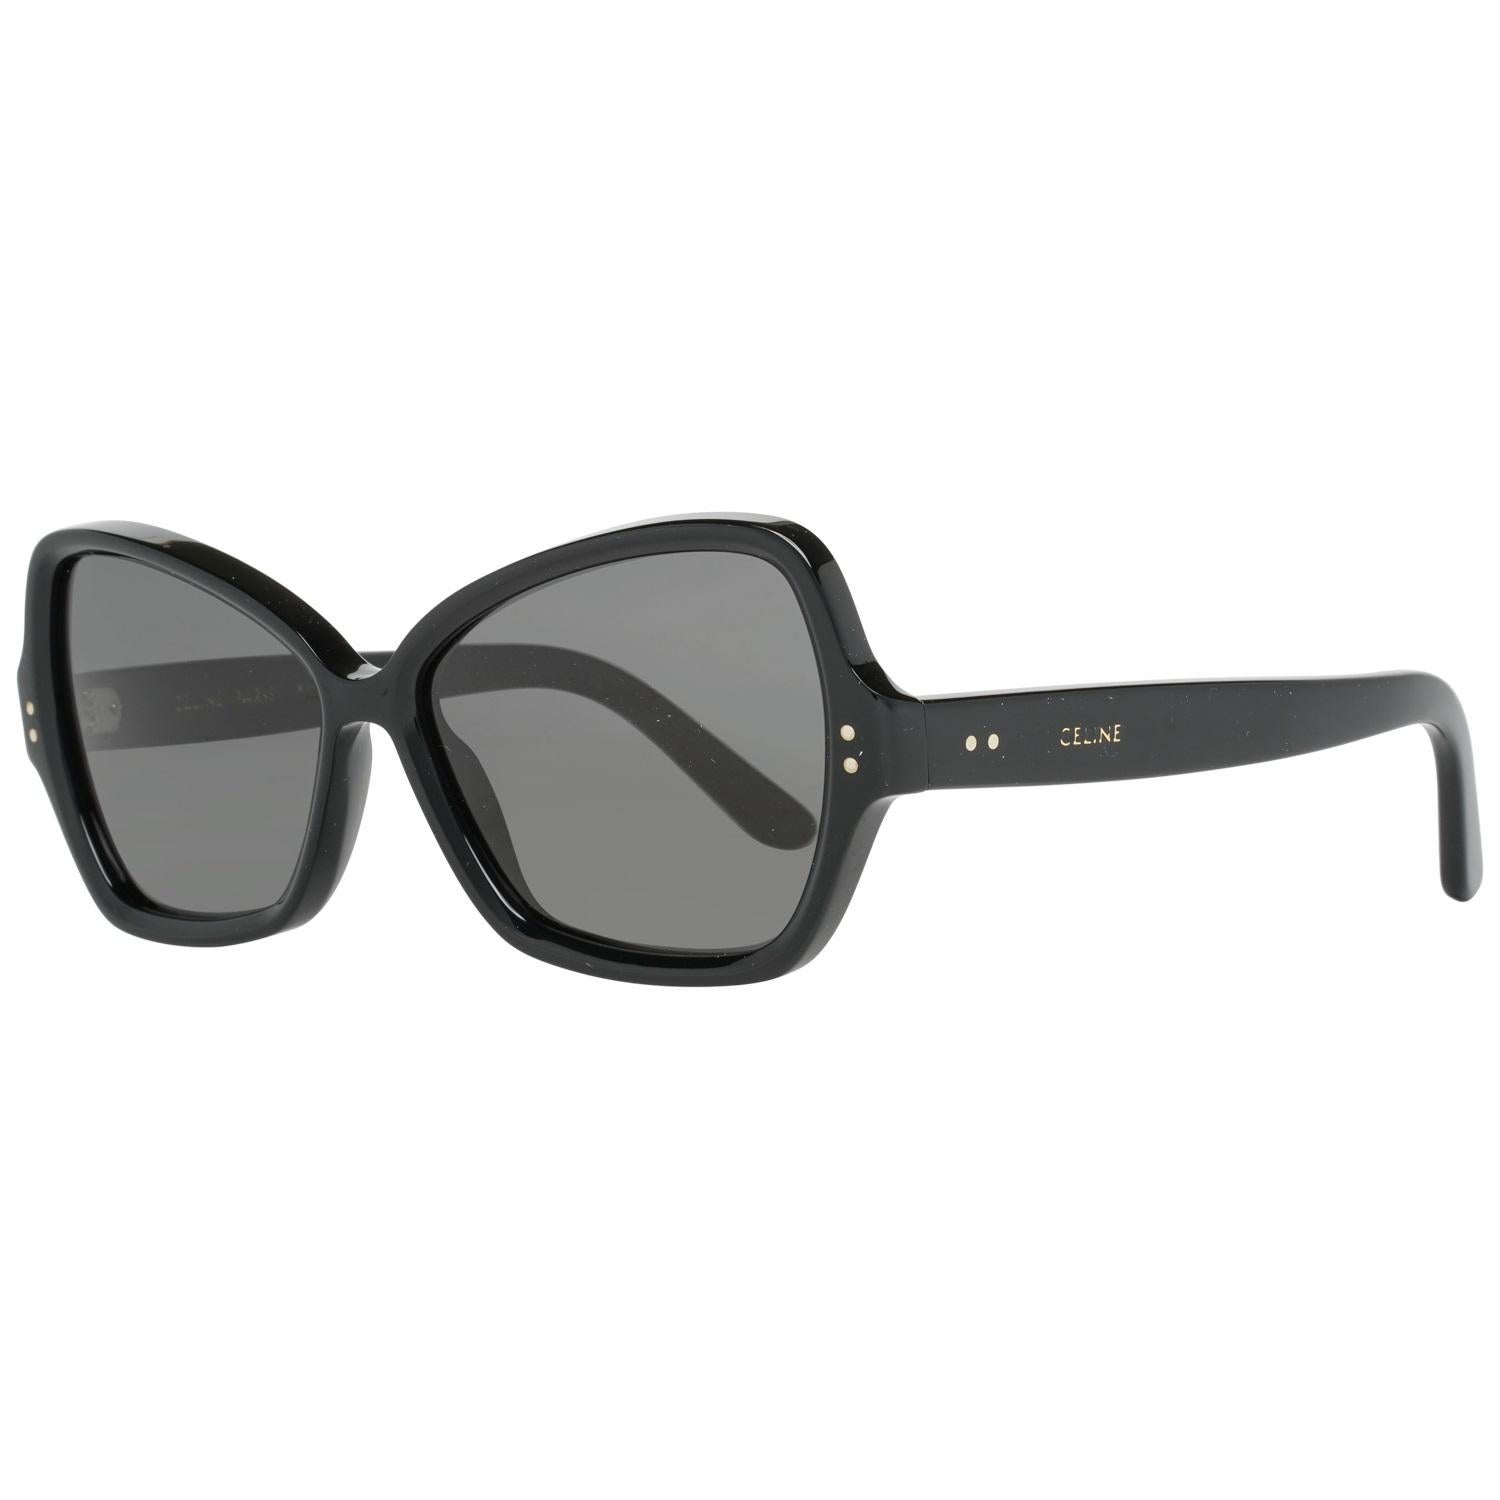 Details

MATERIAL: Acetate

COLOR: Black

MODEL: CL40075I 5601A

GENDER: Women

COUNTRY OF MANUFACTURE: Italy

TYPE: Sunglasses

ORIGINAL CASE?: Yes

STYLE: Butterfly

OCCASION: Casual

FEATURES: Lightweight

LENS COLOR: Grey

LENS TECHNOLOGY: No